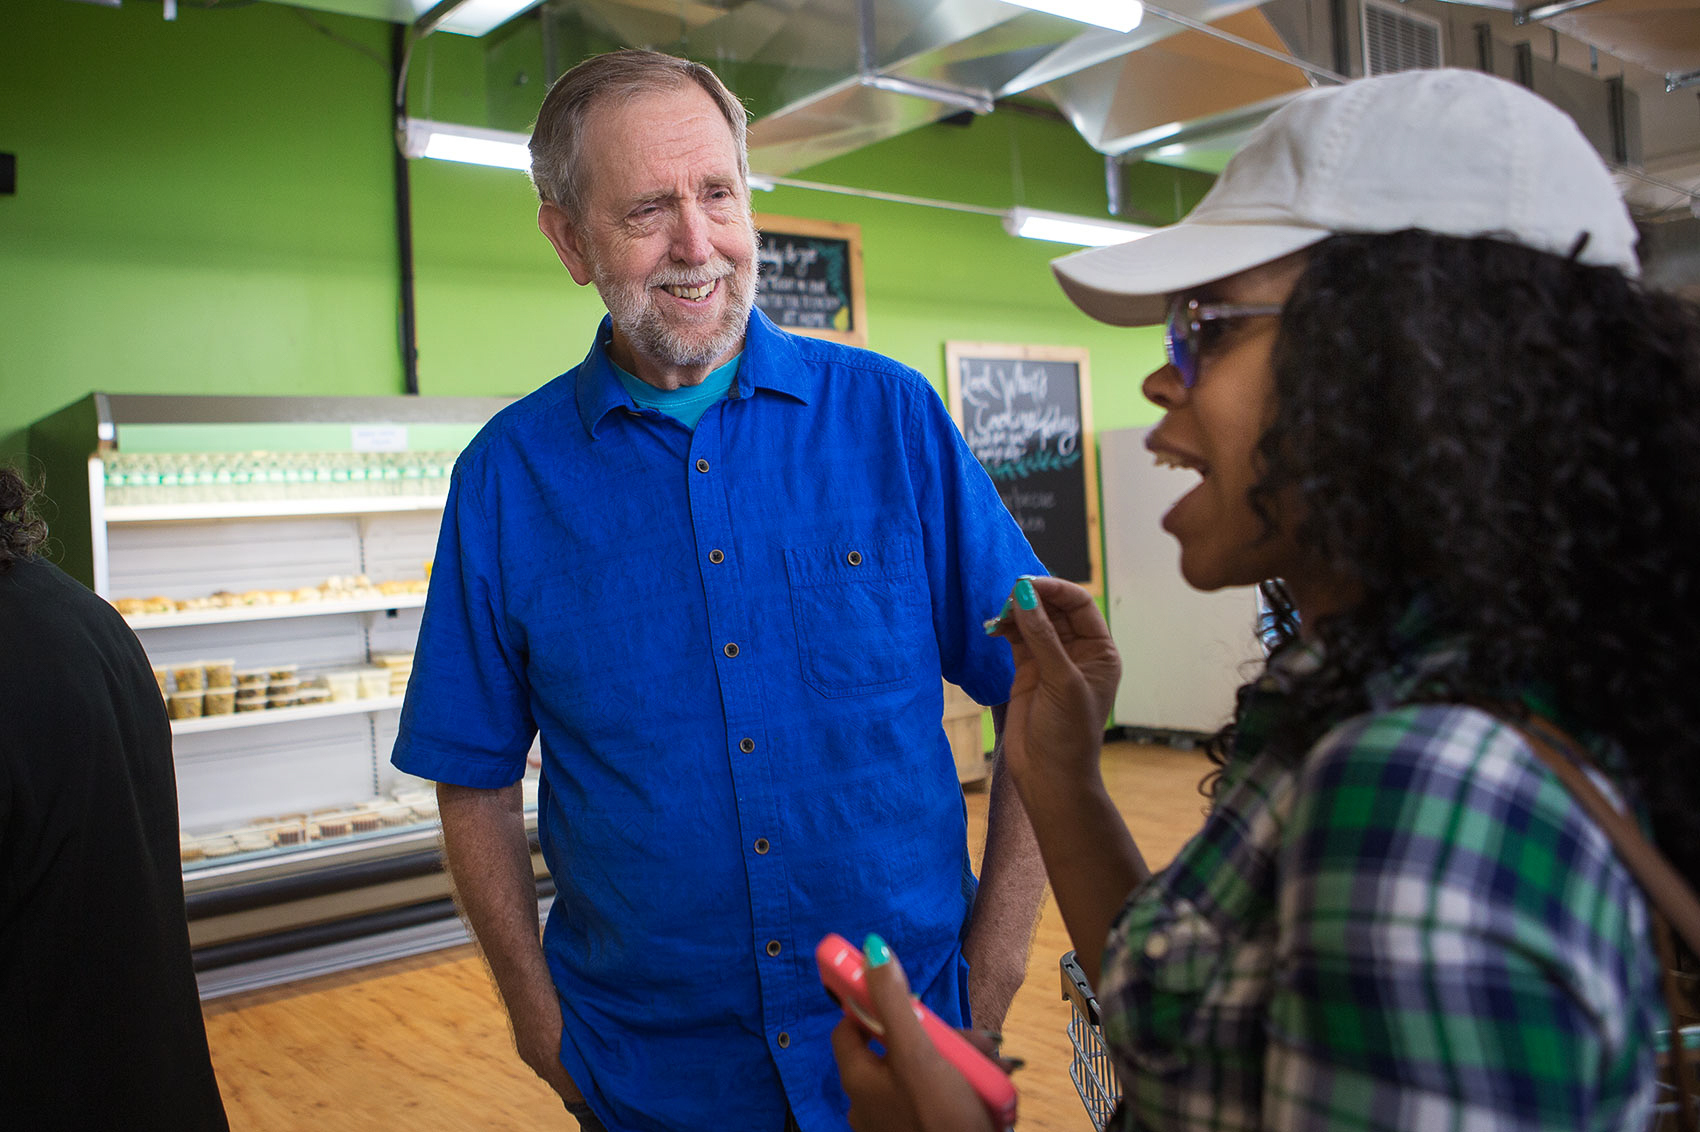 Daily Table founder Doug Rauch greets Latoya Rush after she walks into the store. 